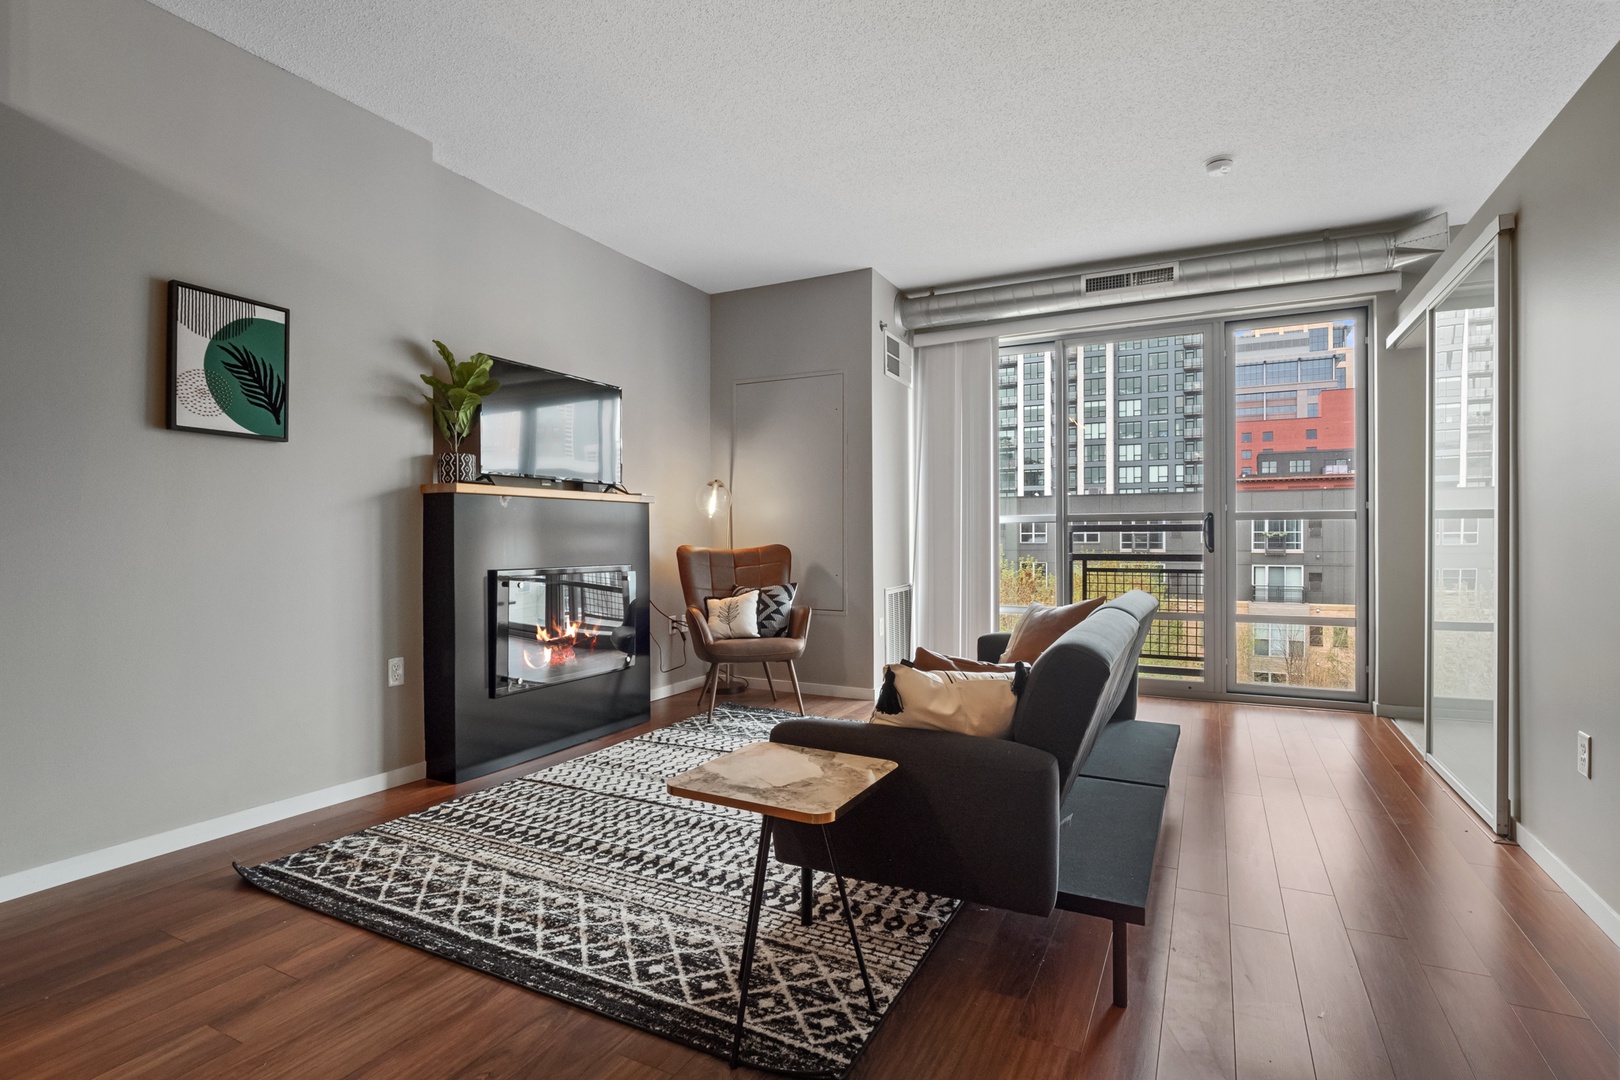 Elevate Your Stay: Make Memories in the Spacious Living Room of Your City Club Condo